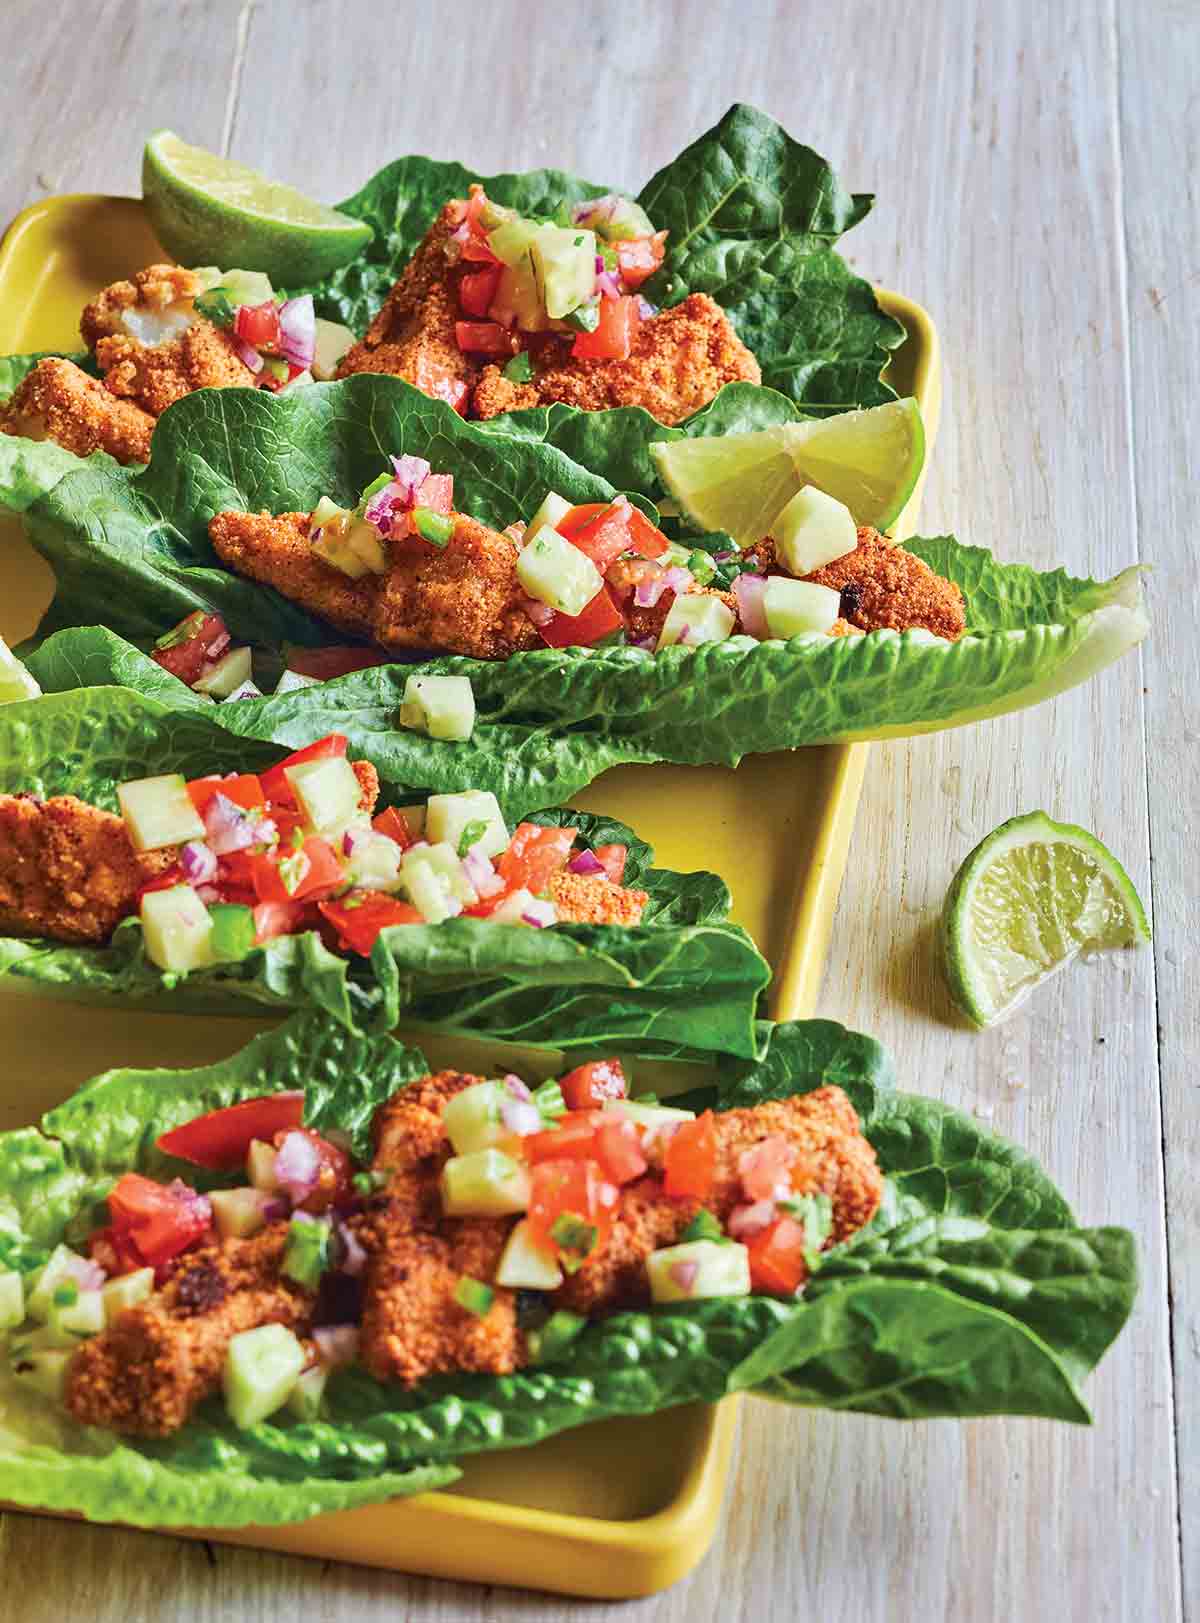 Four low-carb fish tacos--almond-meal coated cod and cucumber salsa in lettuce leaves--with a slice of lime. You're gonna love these babies!